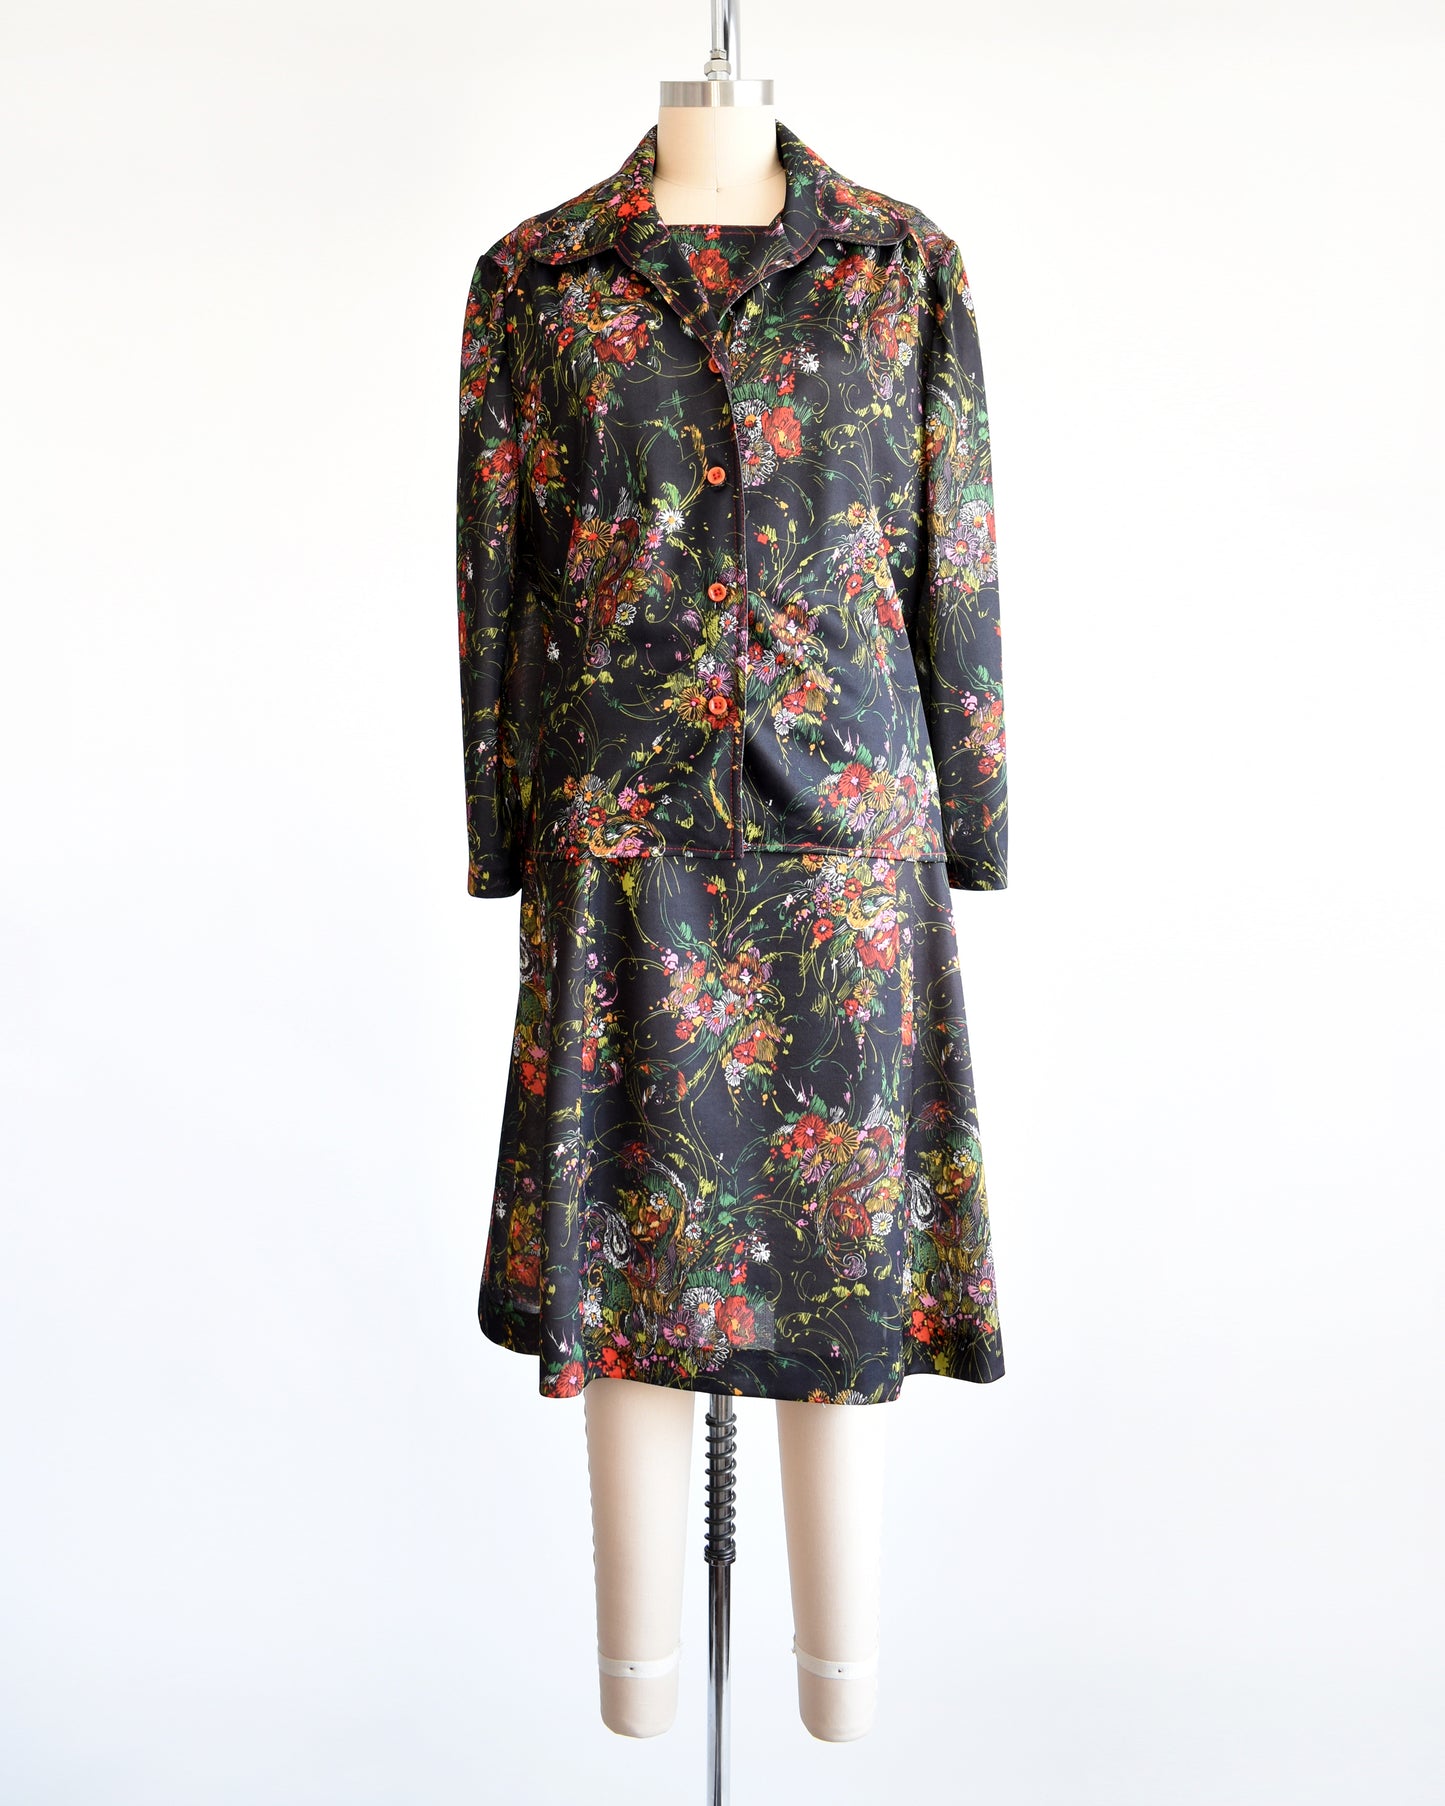 a vintage 1970s black floral dress set that comes with a dress and a matching top